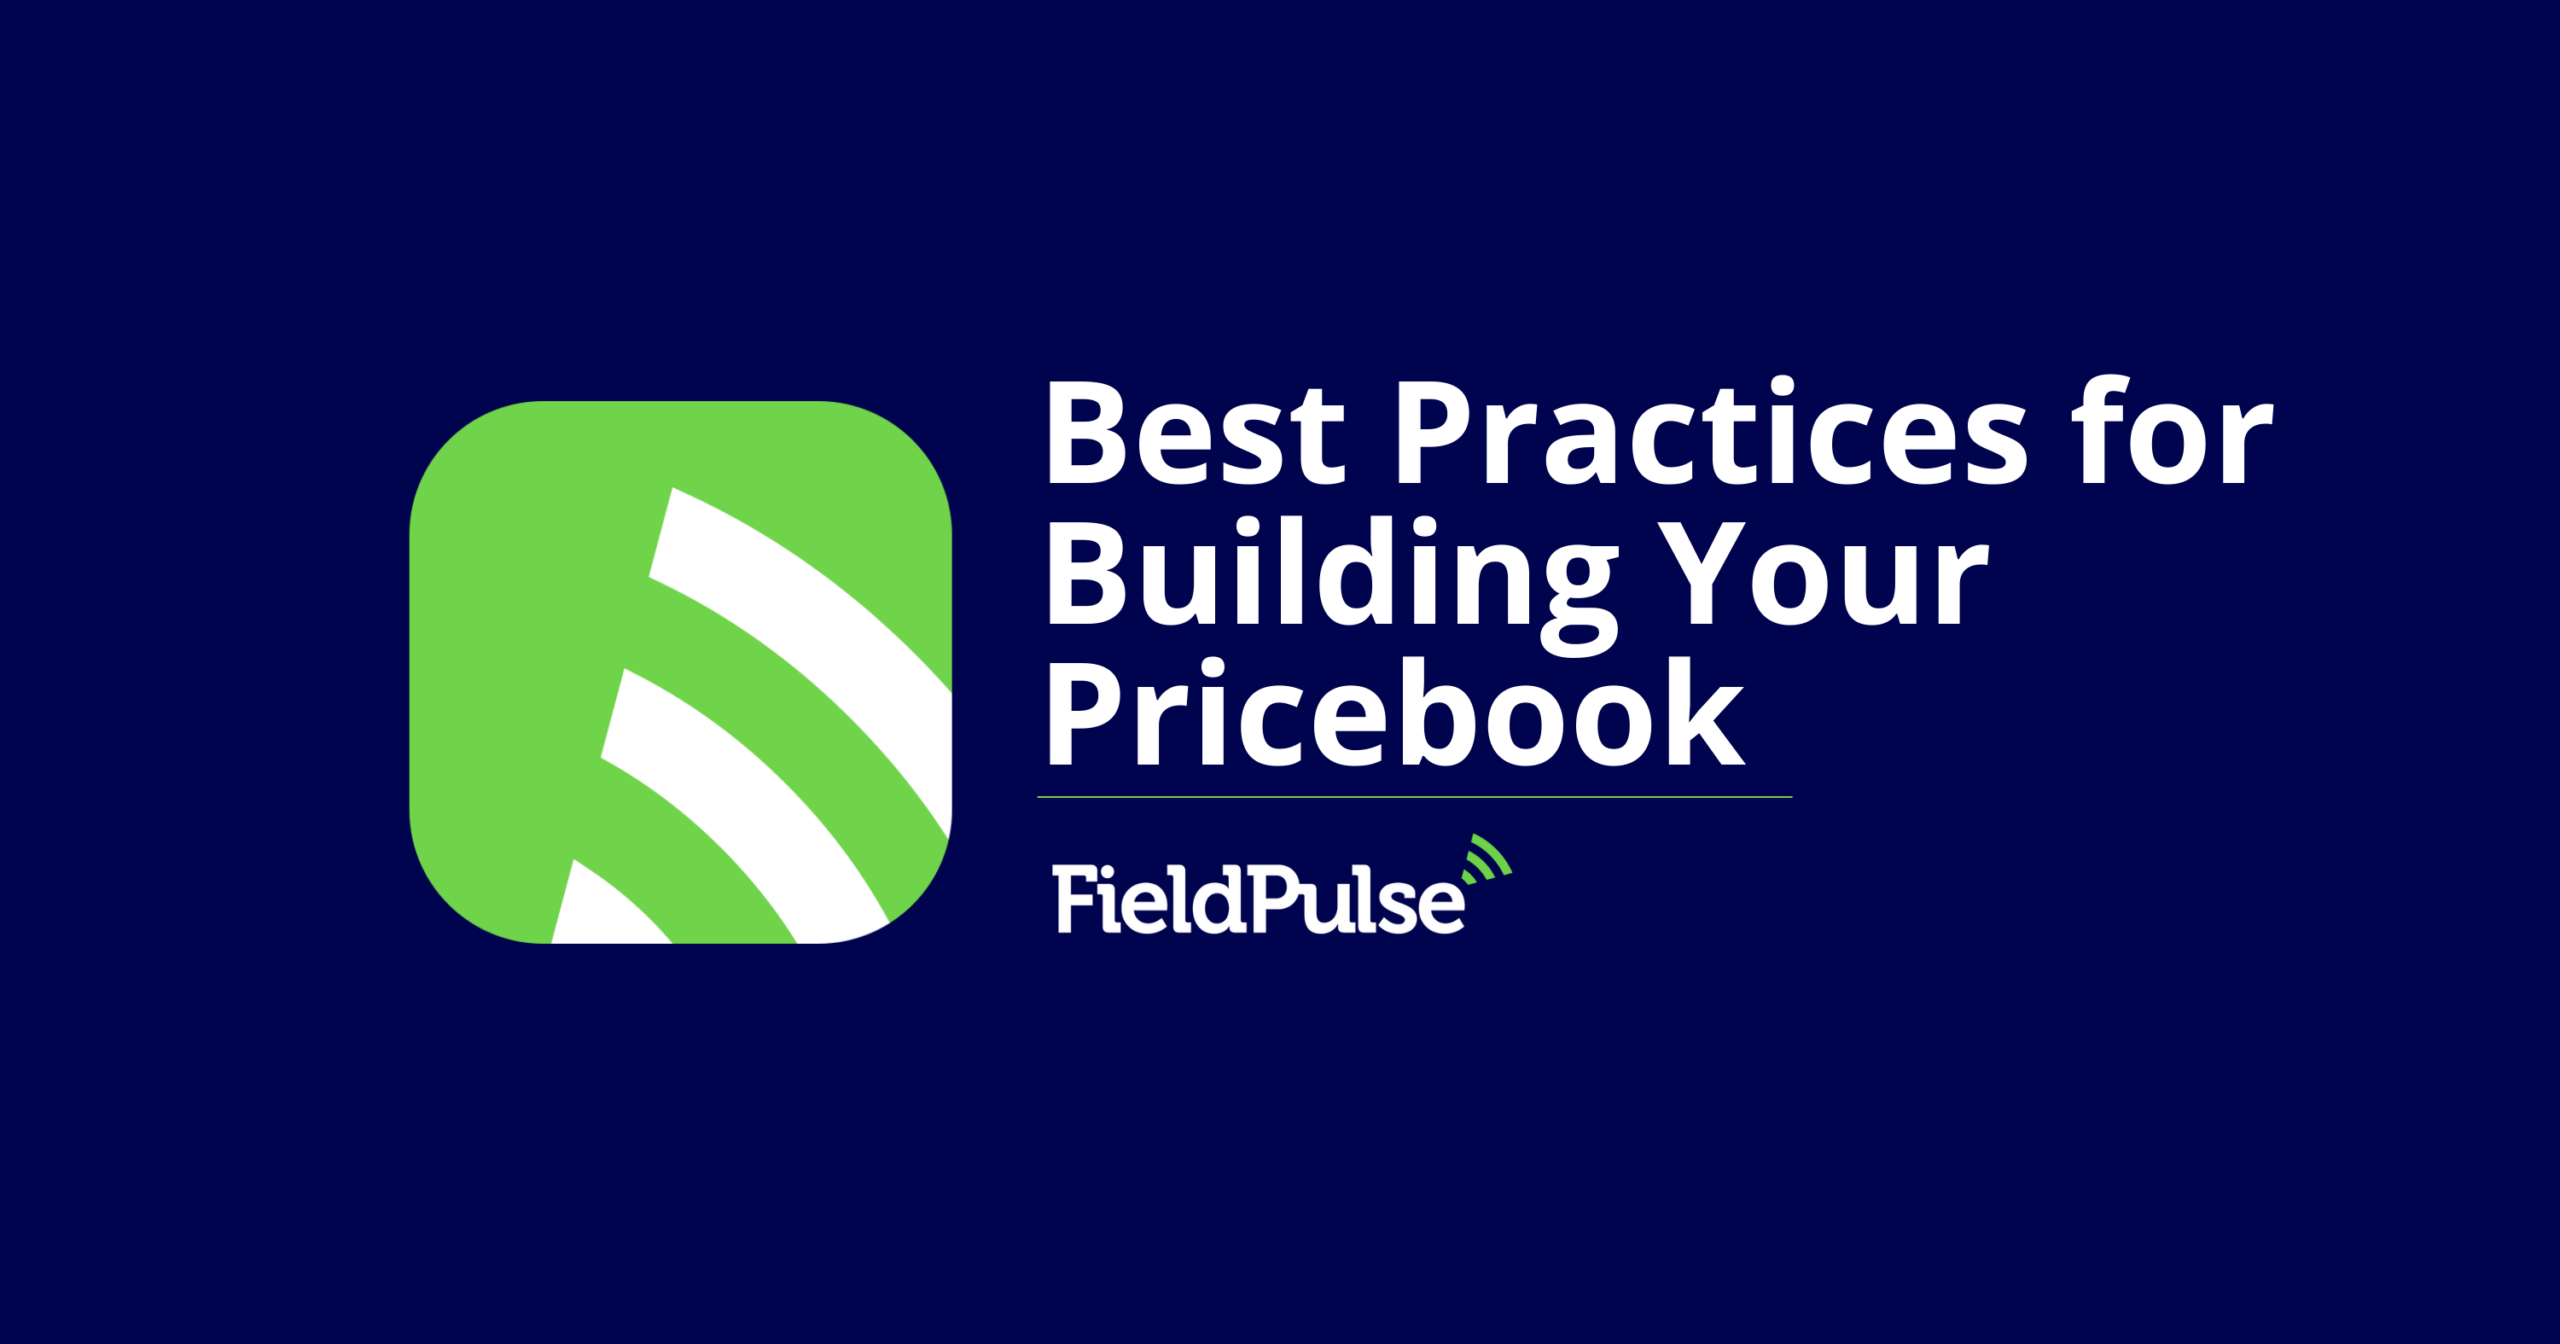 Best Practices for Building Your Pricebook